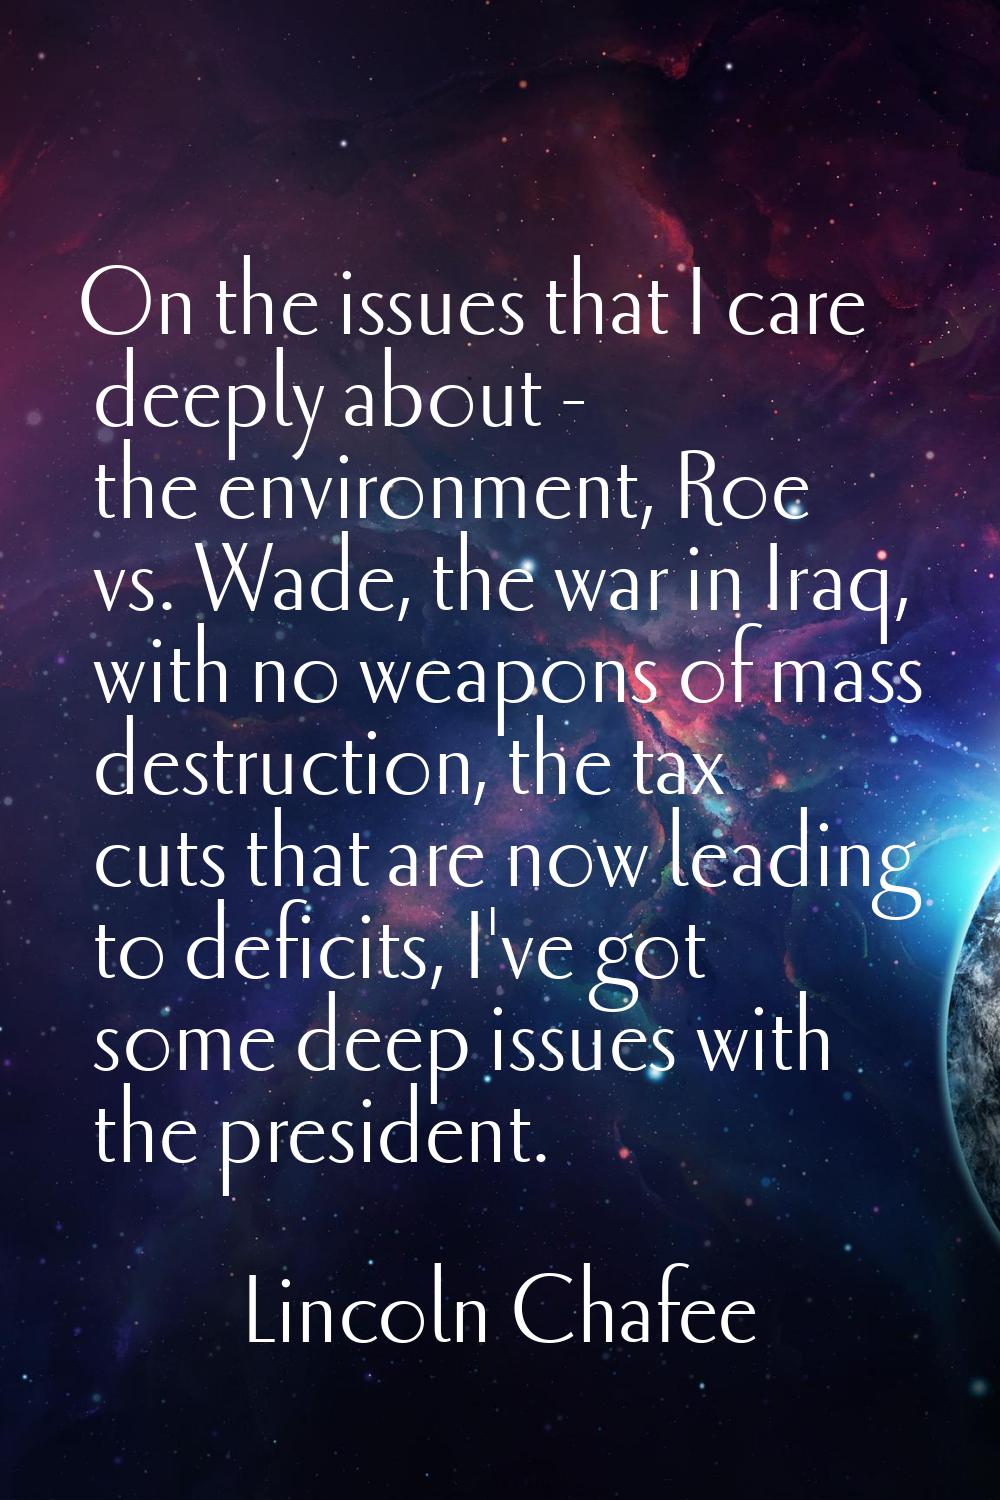 On the issues that I care deeply about - the environment, Roe vs. Wade, the war in Iraq, with no we